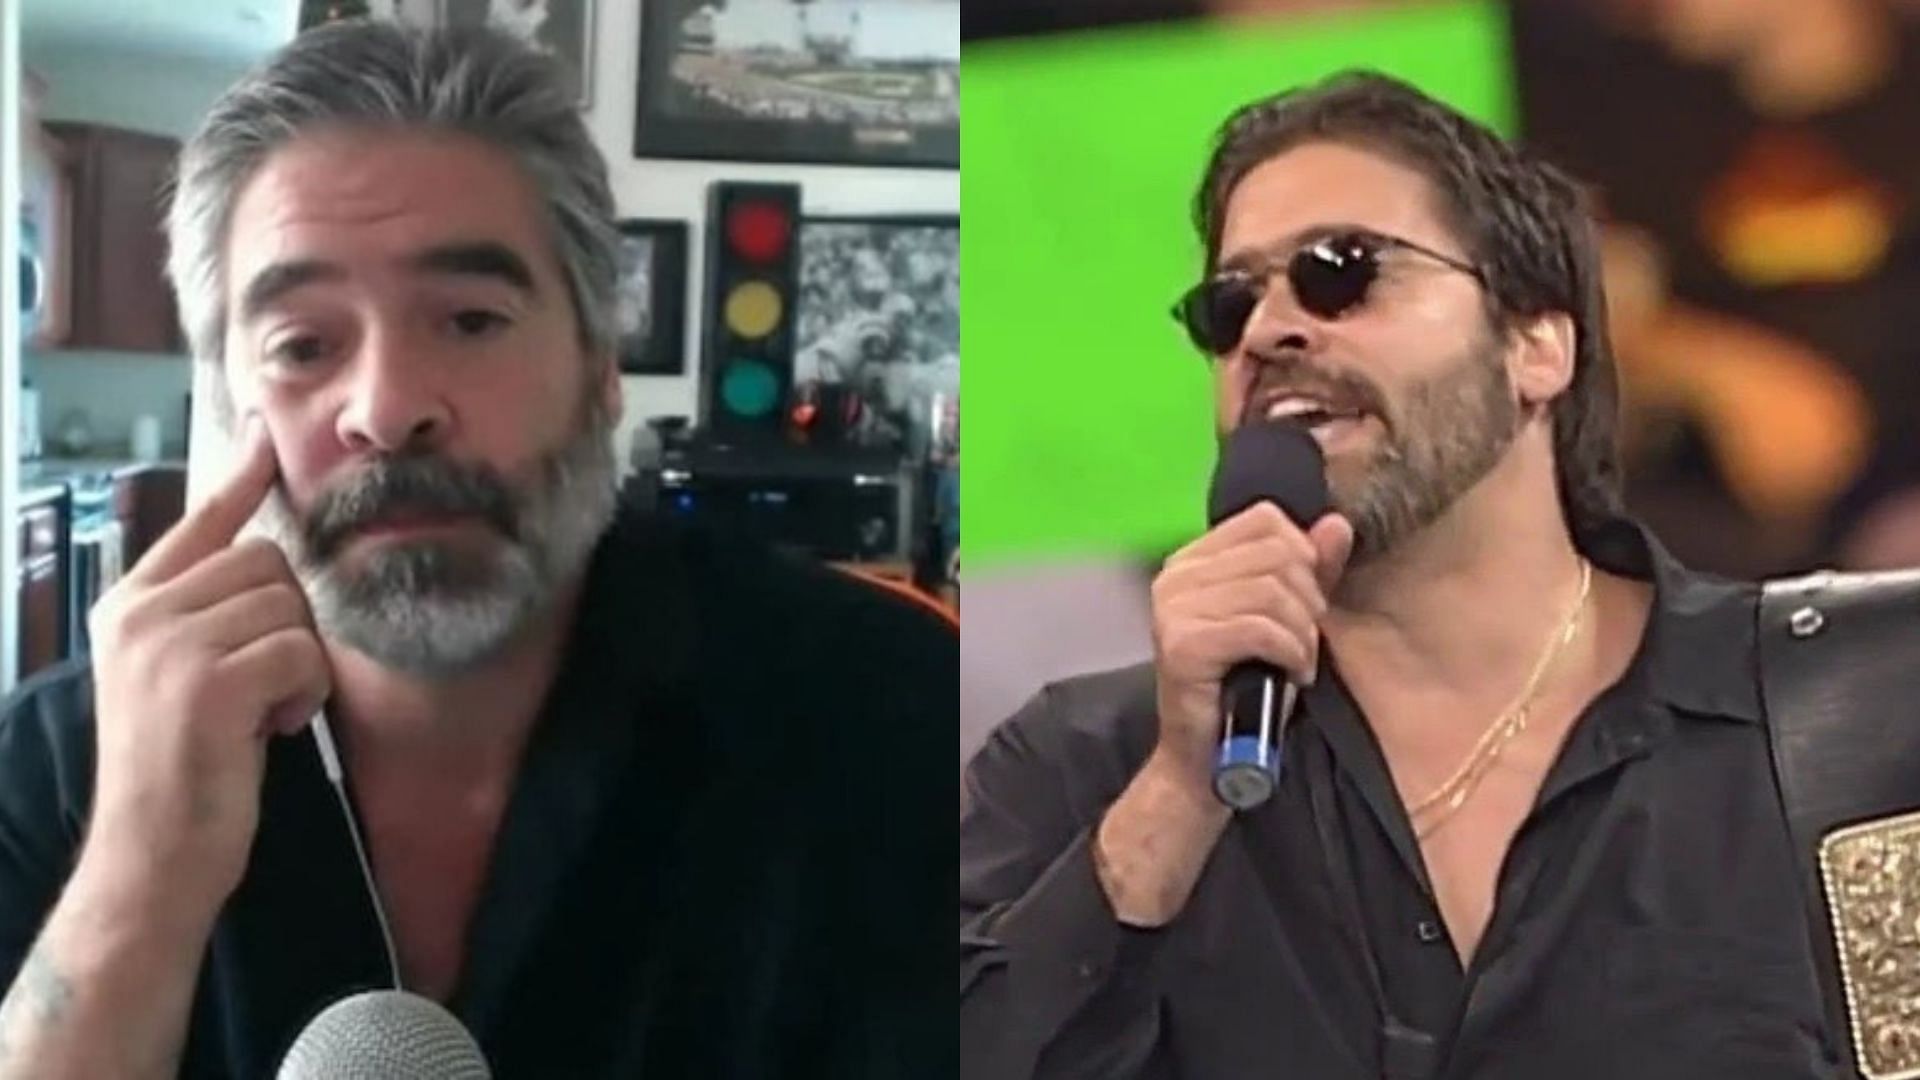 Vince Russo is a former creative writer